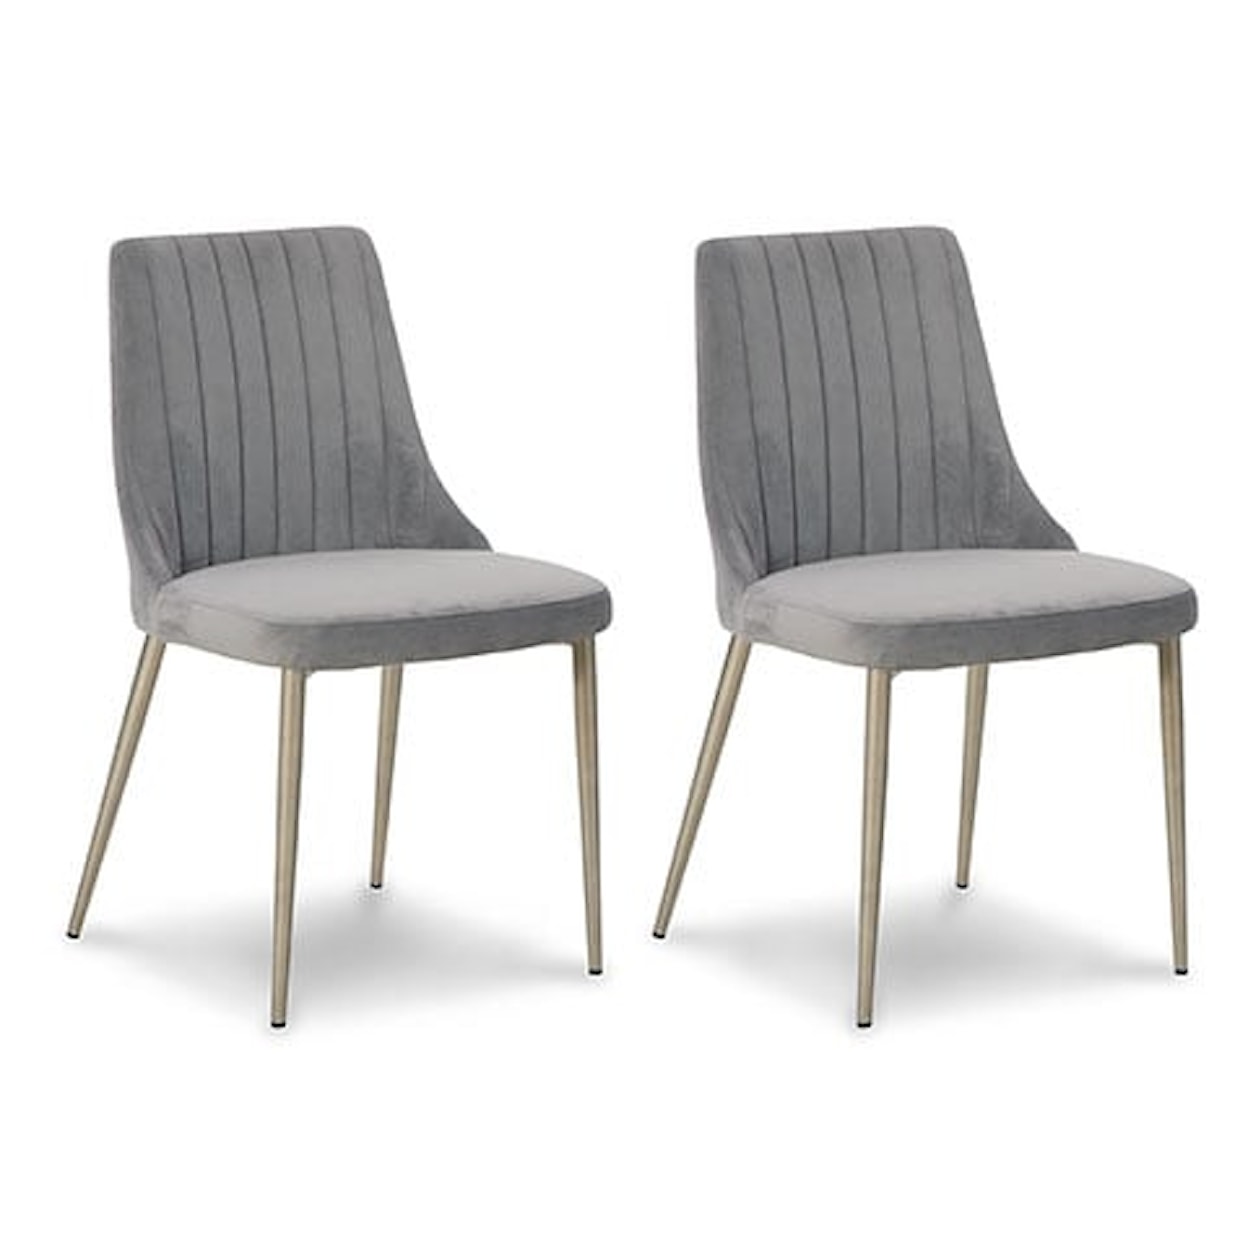 Signature Design by Ashley Furniture Barchoni Upholstered Dining Side Chair